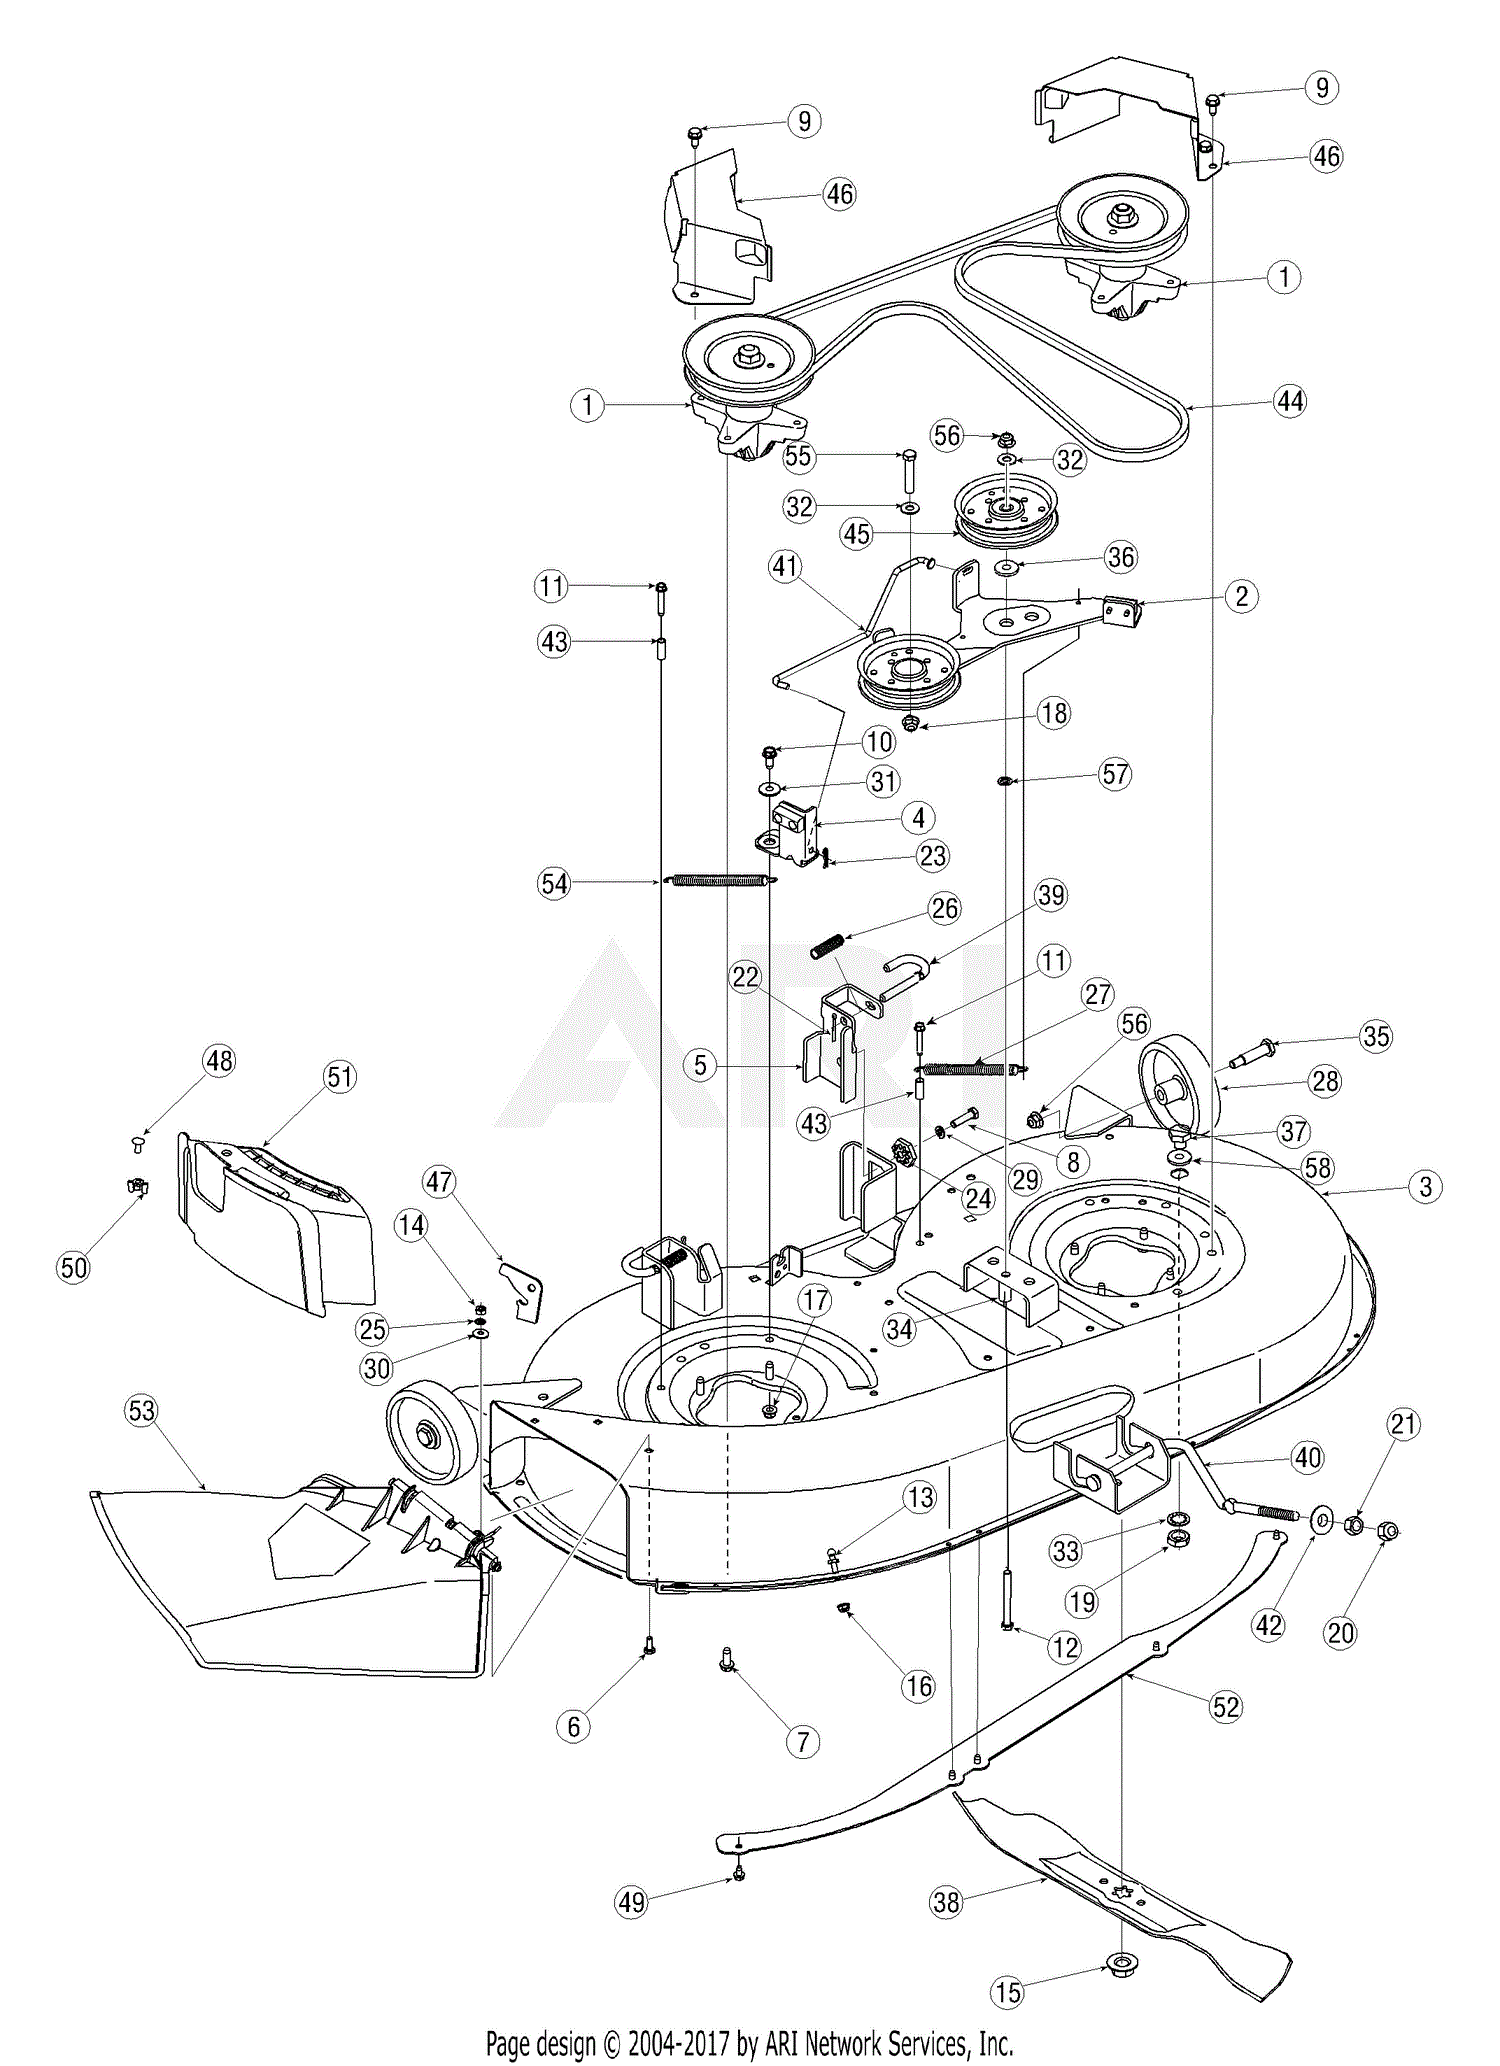 Troy Bilt Bronco Riding Mower Wiring Diagram With Fuse